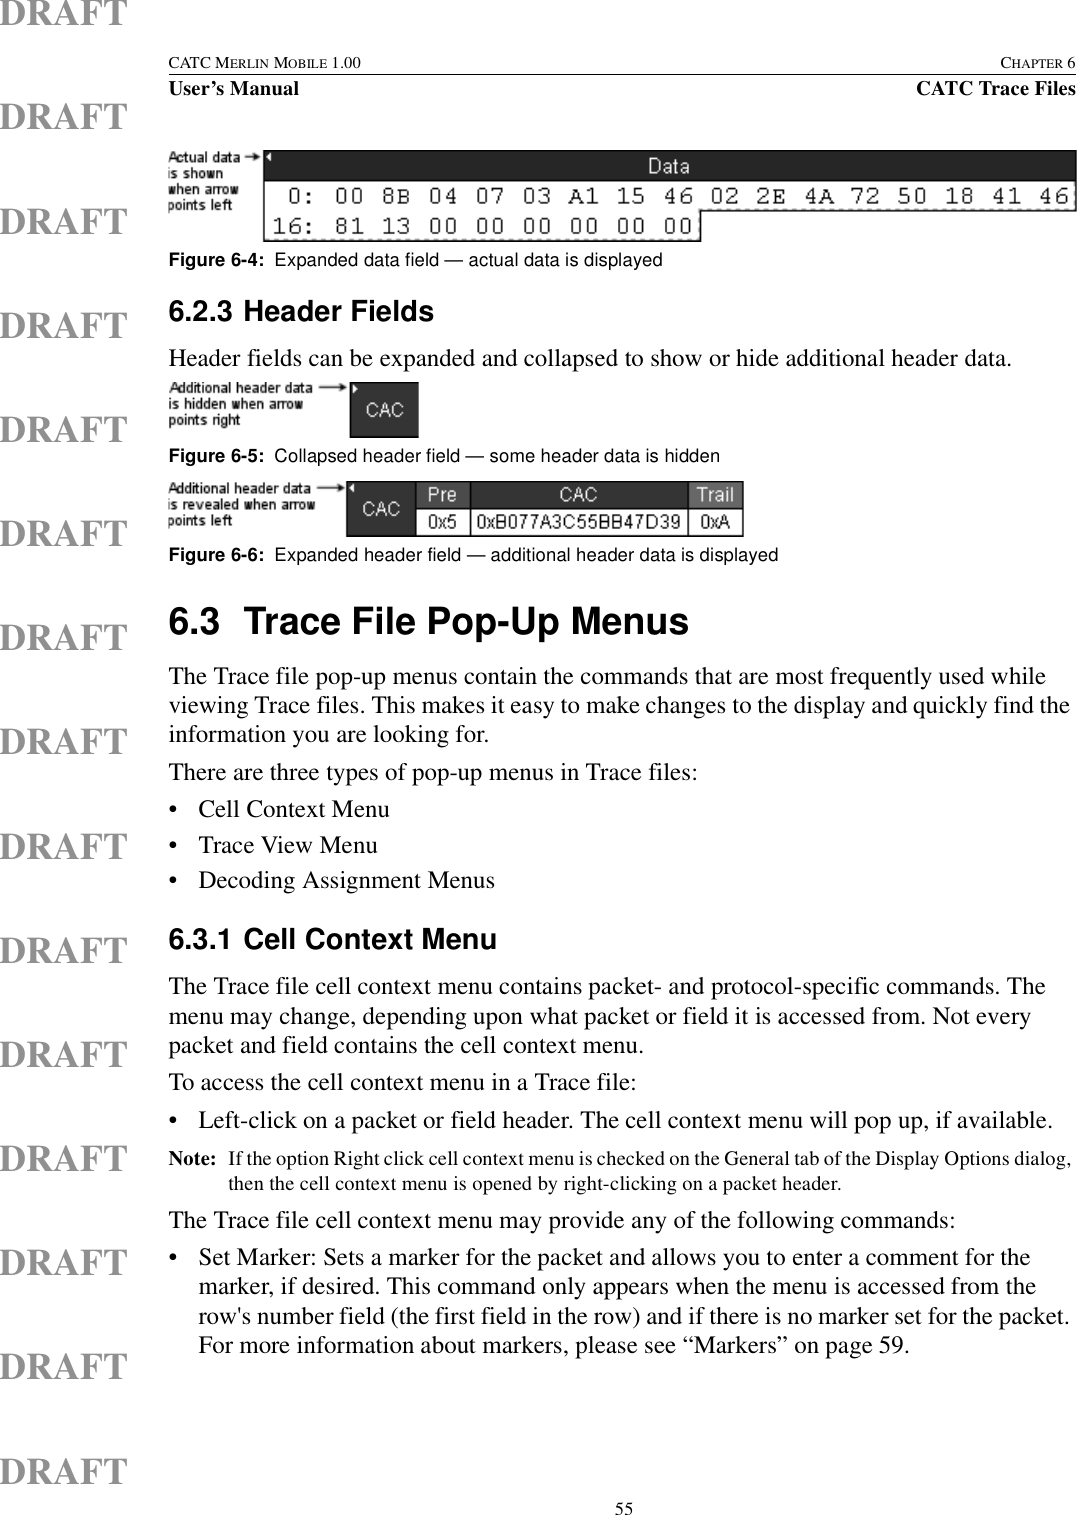  55CATC MERLIN MOBILE 1.00 CHAPTER 6User’s Manual CATC Trace FilesDRAFTDRAFTDRAFTDRAFTDRAFTDRAFTDRAFTDRAFTDRAFTDRAFTDRAFTDRAFTDRAFTDRAFTDRAFT6.2.3 Header FieldsHeader fields can be expanded and collapsed to show or hide additional header data. 6.3 Trace File Pop-Up MenusThe Trace file pop-up menus contain the commands that are most frequently used while viewing Trace files. This makes it easy to make changes to the display and quickly find the information you are looking for.There are three types of pop-up menus in Trace files:• Cell Context Menu • Trace View Menu • Decoding Assignment Menus 6.3.1 Cell Context MenuThe Trace file cell context menu contains packet- and protocol-specific commands. The menu may change, depending upon what packet or field it is accessed from. Not every packet and field contains the cell context menu.To access the cell context menu in a Trace file:• Left-click on a packet or field header. The cell context menu will pop up, if available.Note: If the option Right click cell context menu is checked on the General tab of the Display Options dialog, then the cell context menu is opened by right-clicking on a packet header.The Trace file cell context menu may provide any of the following commands:• Set Marker: Sets a marker for the packet and allows you to enter a comment for the marker, if desired. This command only appears when the menu is accessed from the row&apos;s number field (the first field in the row) and if there is no marker set for the packet. For more information about markers, please see “Markers” on page 59.Figure 6-4:  Expanded data field — actual data is displayedFigure 6-5:  Collapsed header field — some header data is hiddenFigure 6-6:  Expanded header field — additional header data is displayed